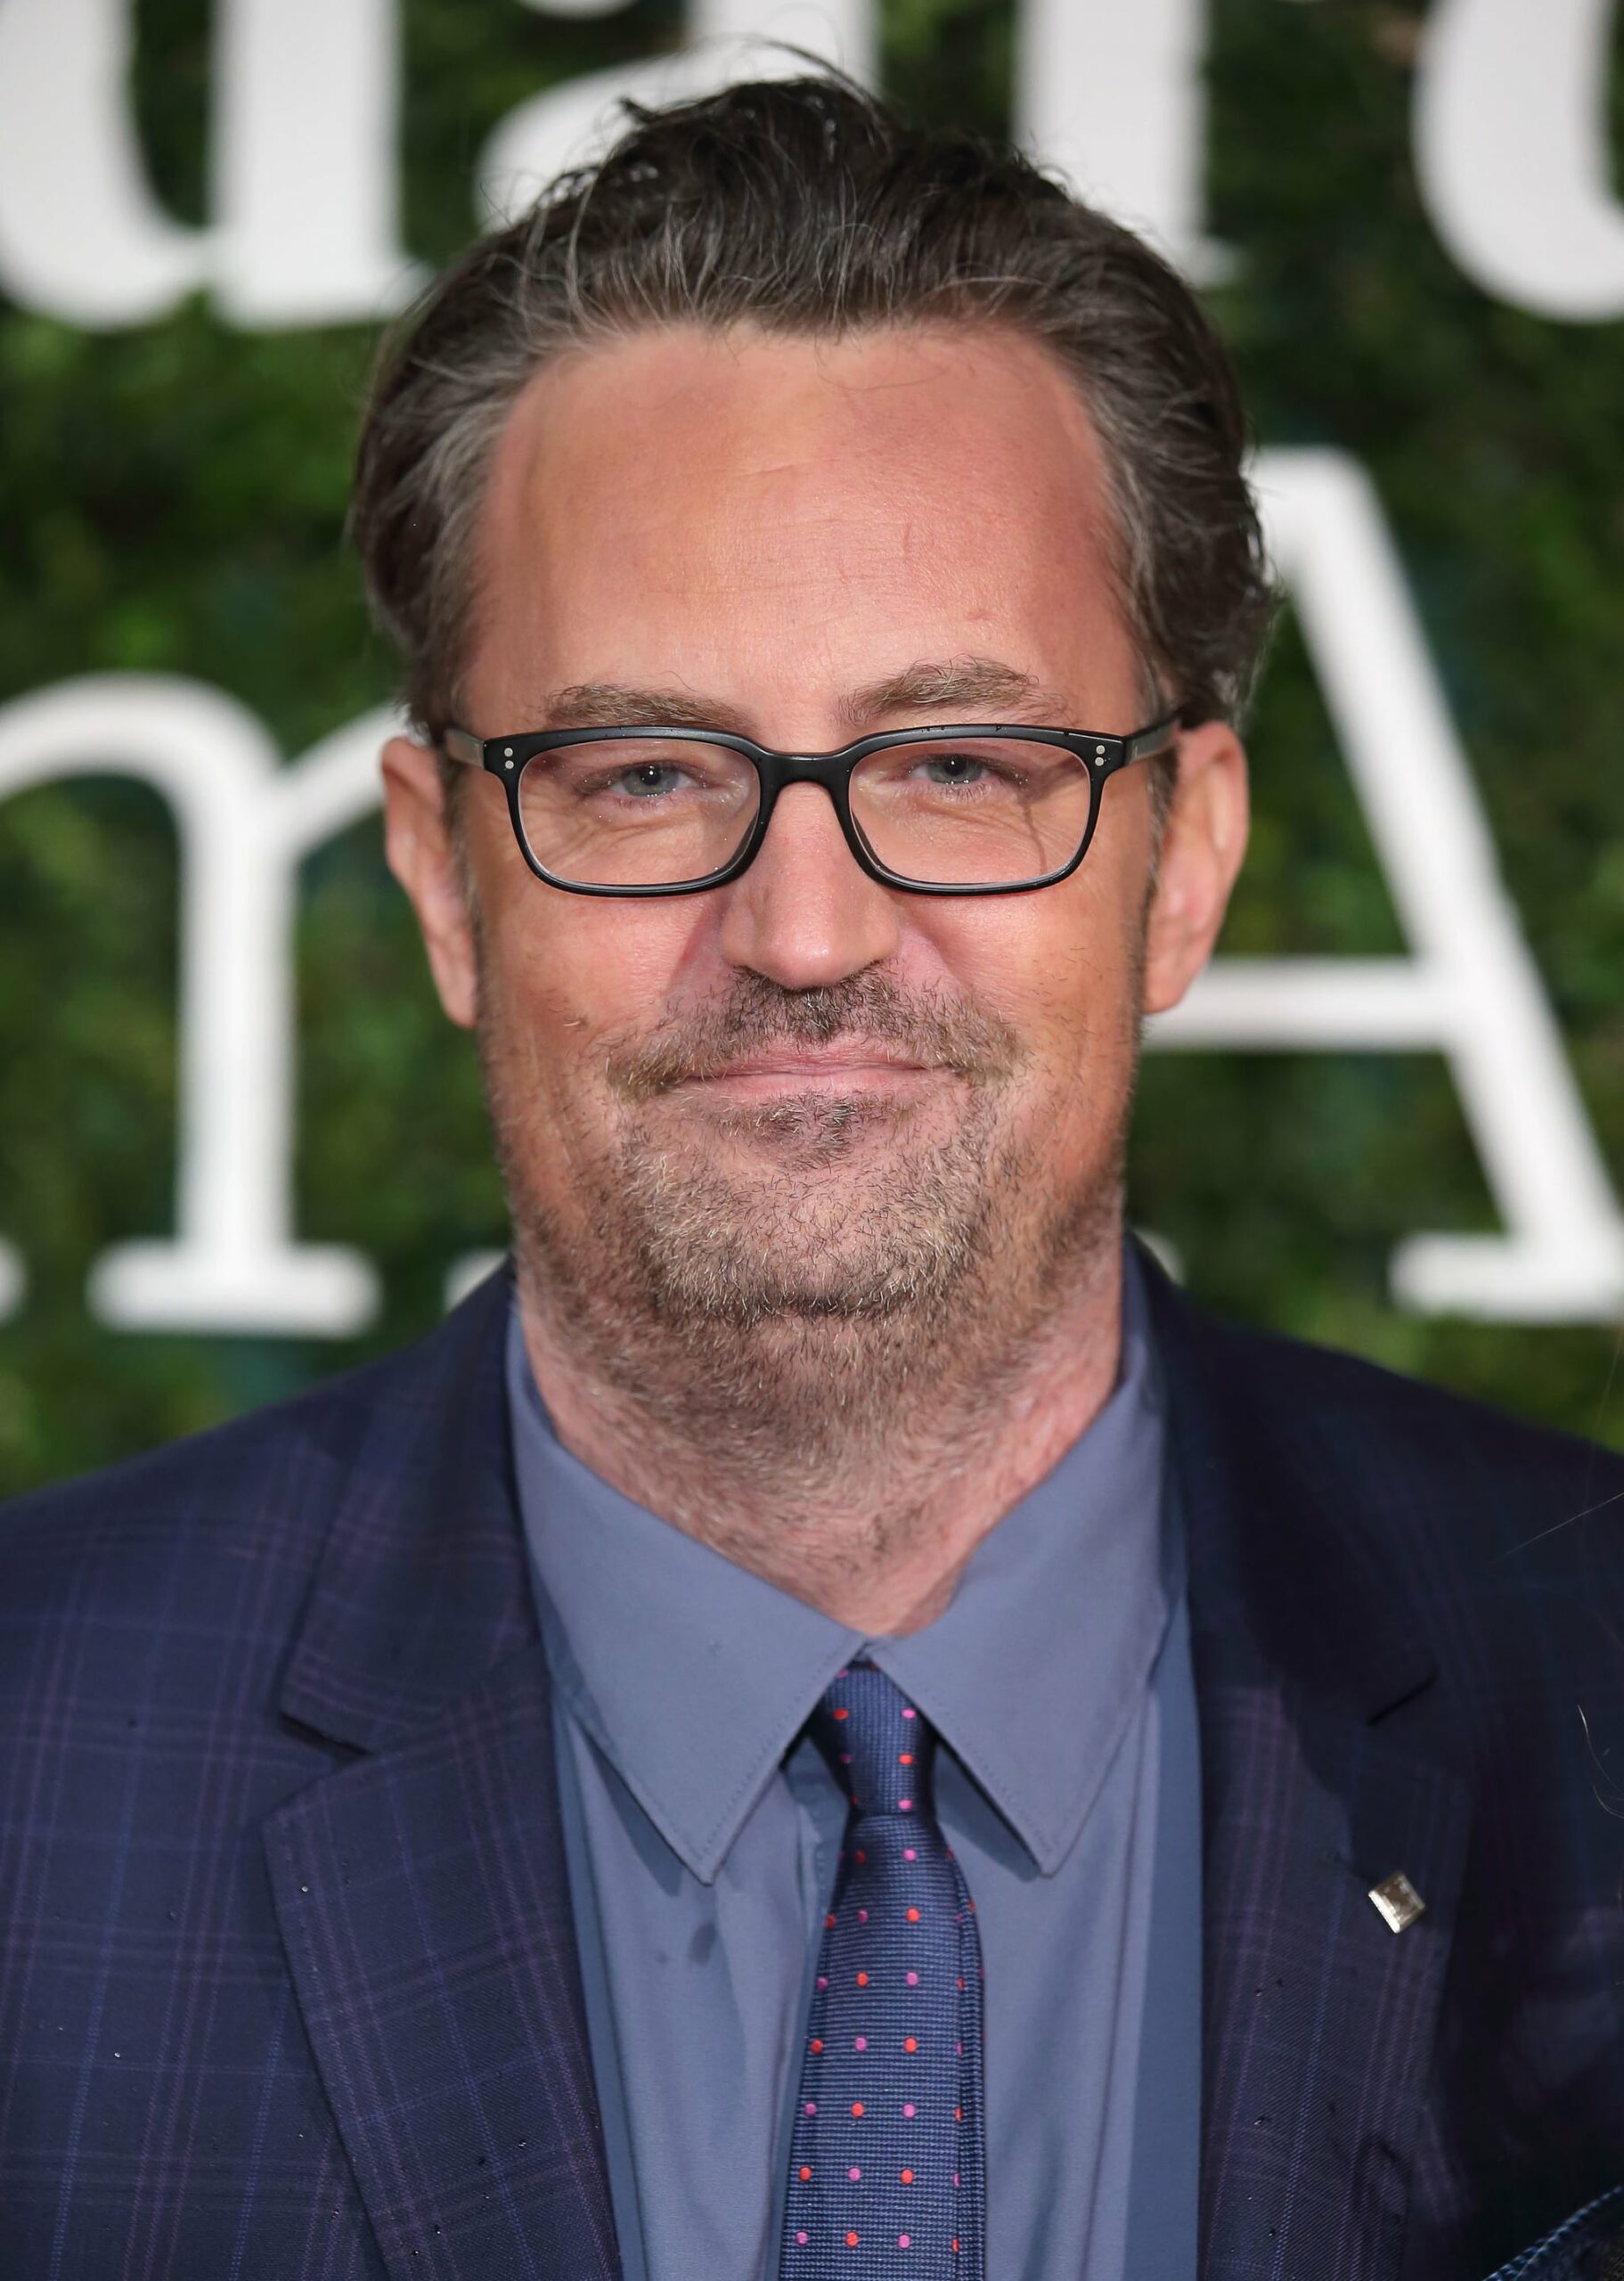 LONDON, ENGLAND - FEBRUARY 07:  Matthew Perry attends the London Evening Standard British Film Awards at Television Centre on February 7, 2016 in London, England.  (Photo by Mike Marsland/WireImage)